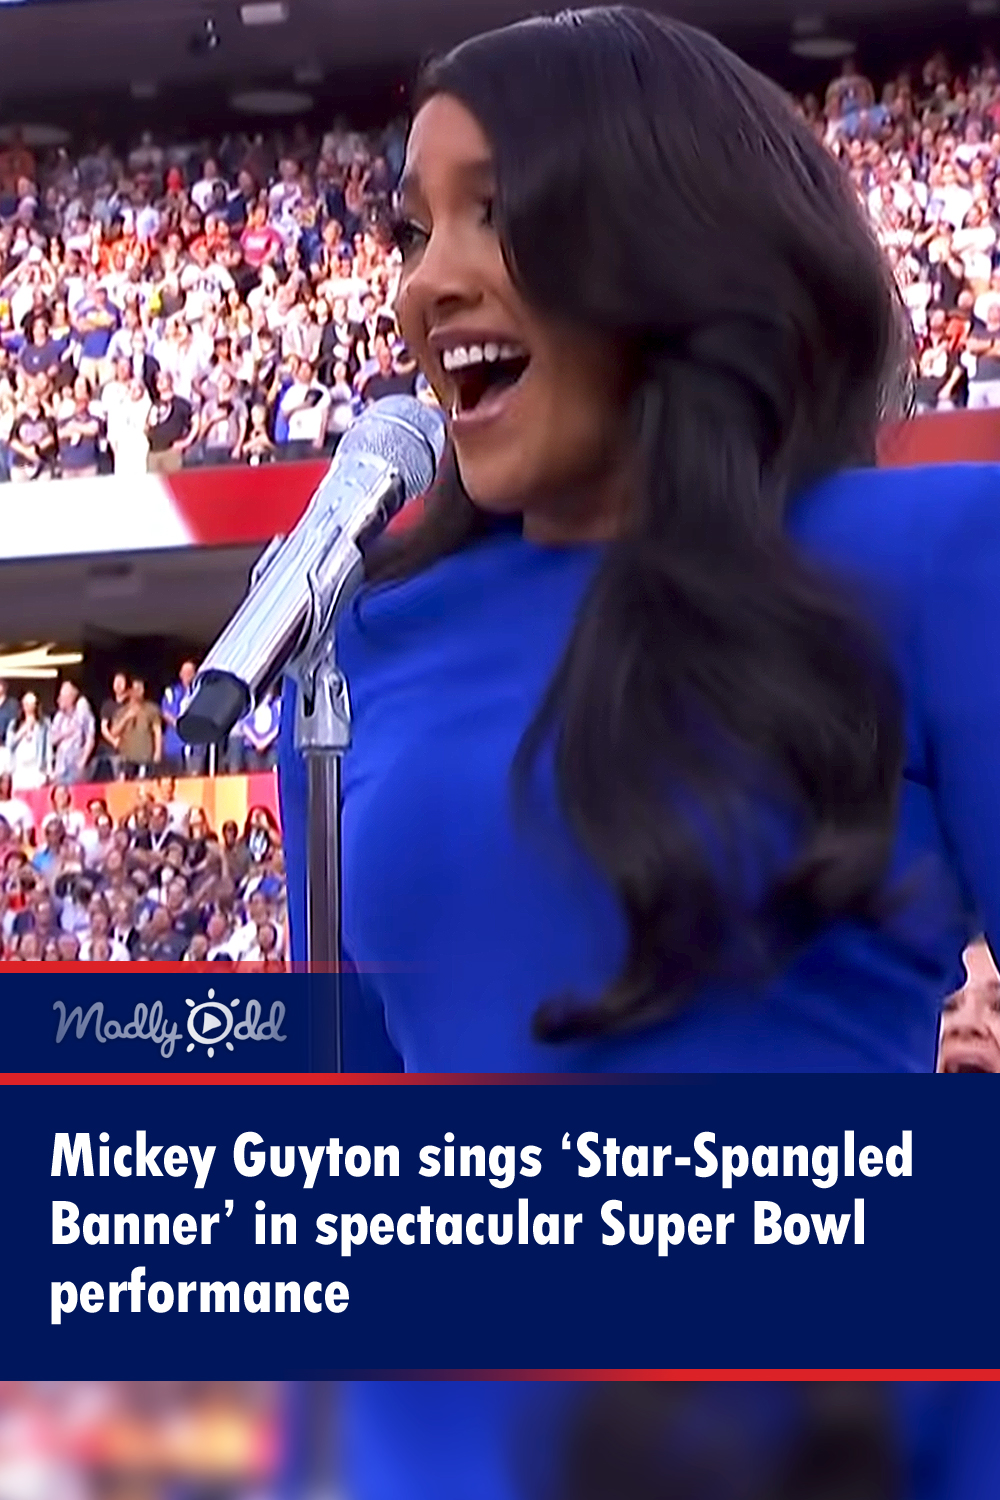 Mickey Guyton sings ‘Star-Spangled Banner’ in spectacular Super Bowl performance